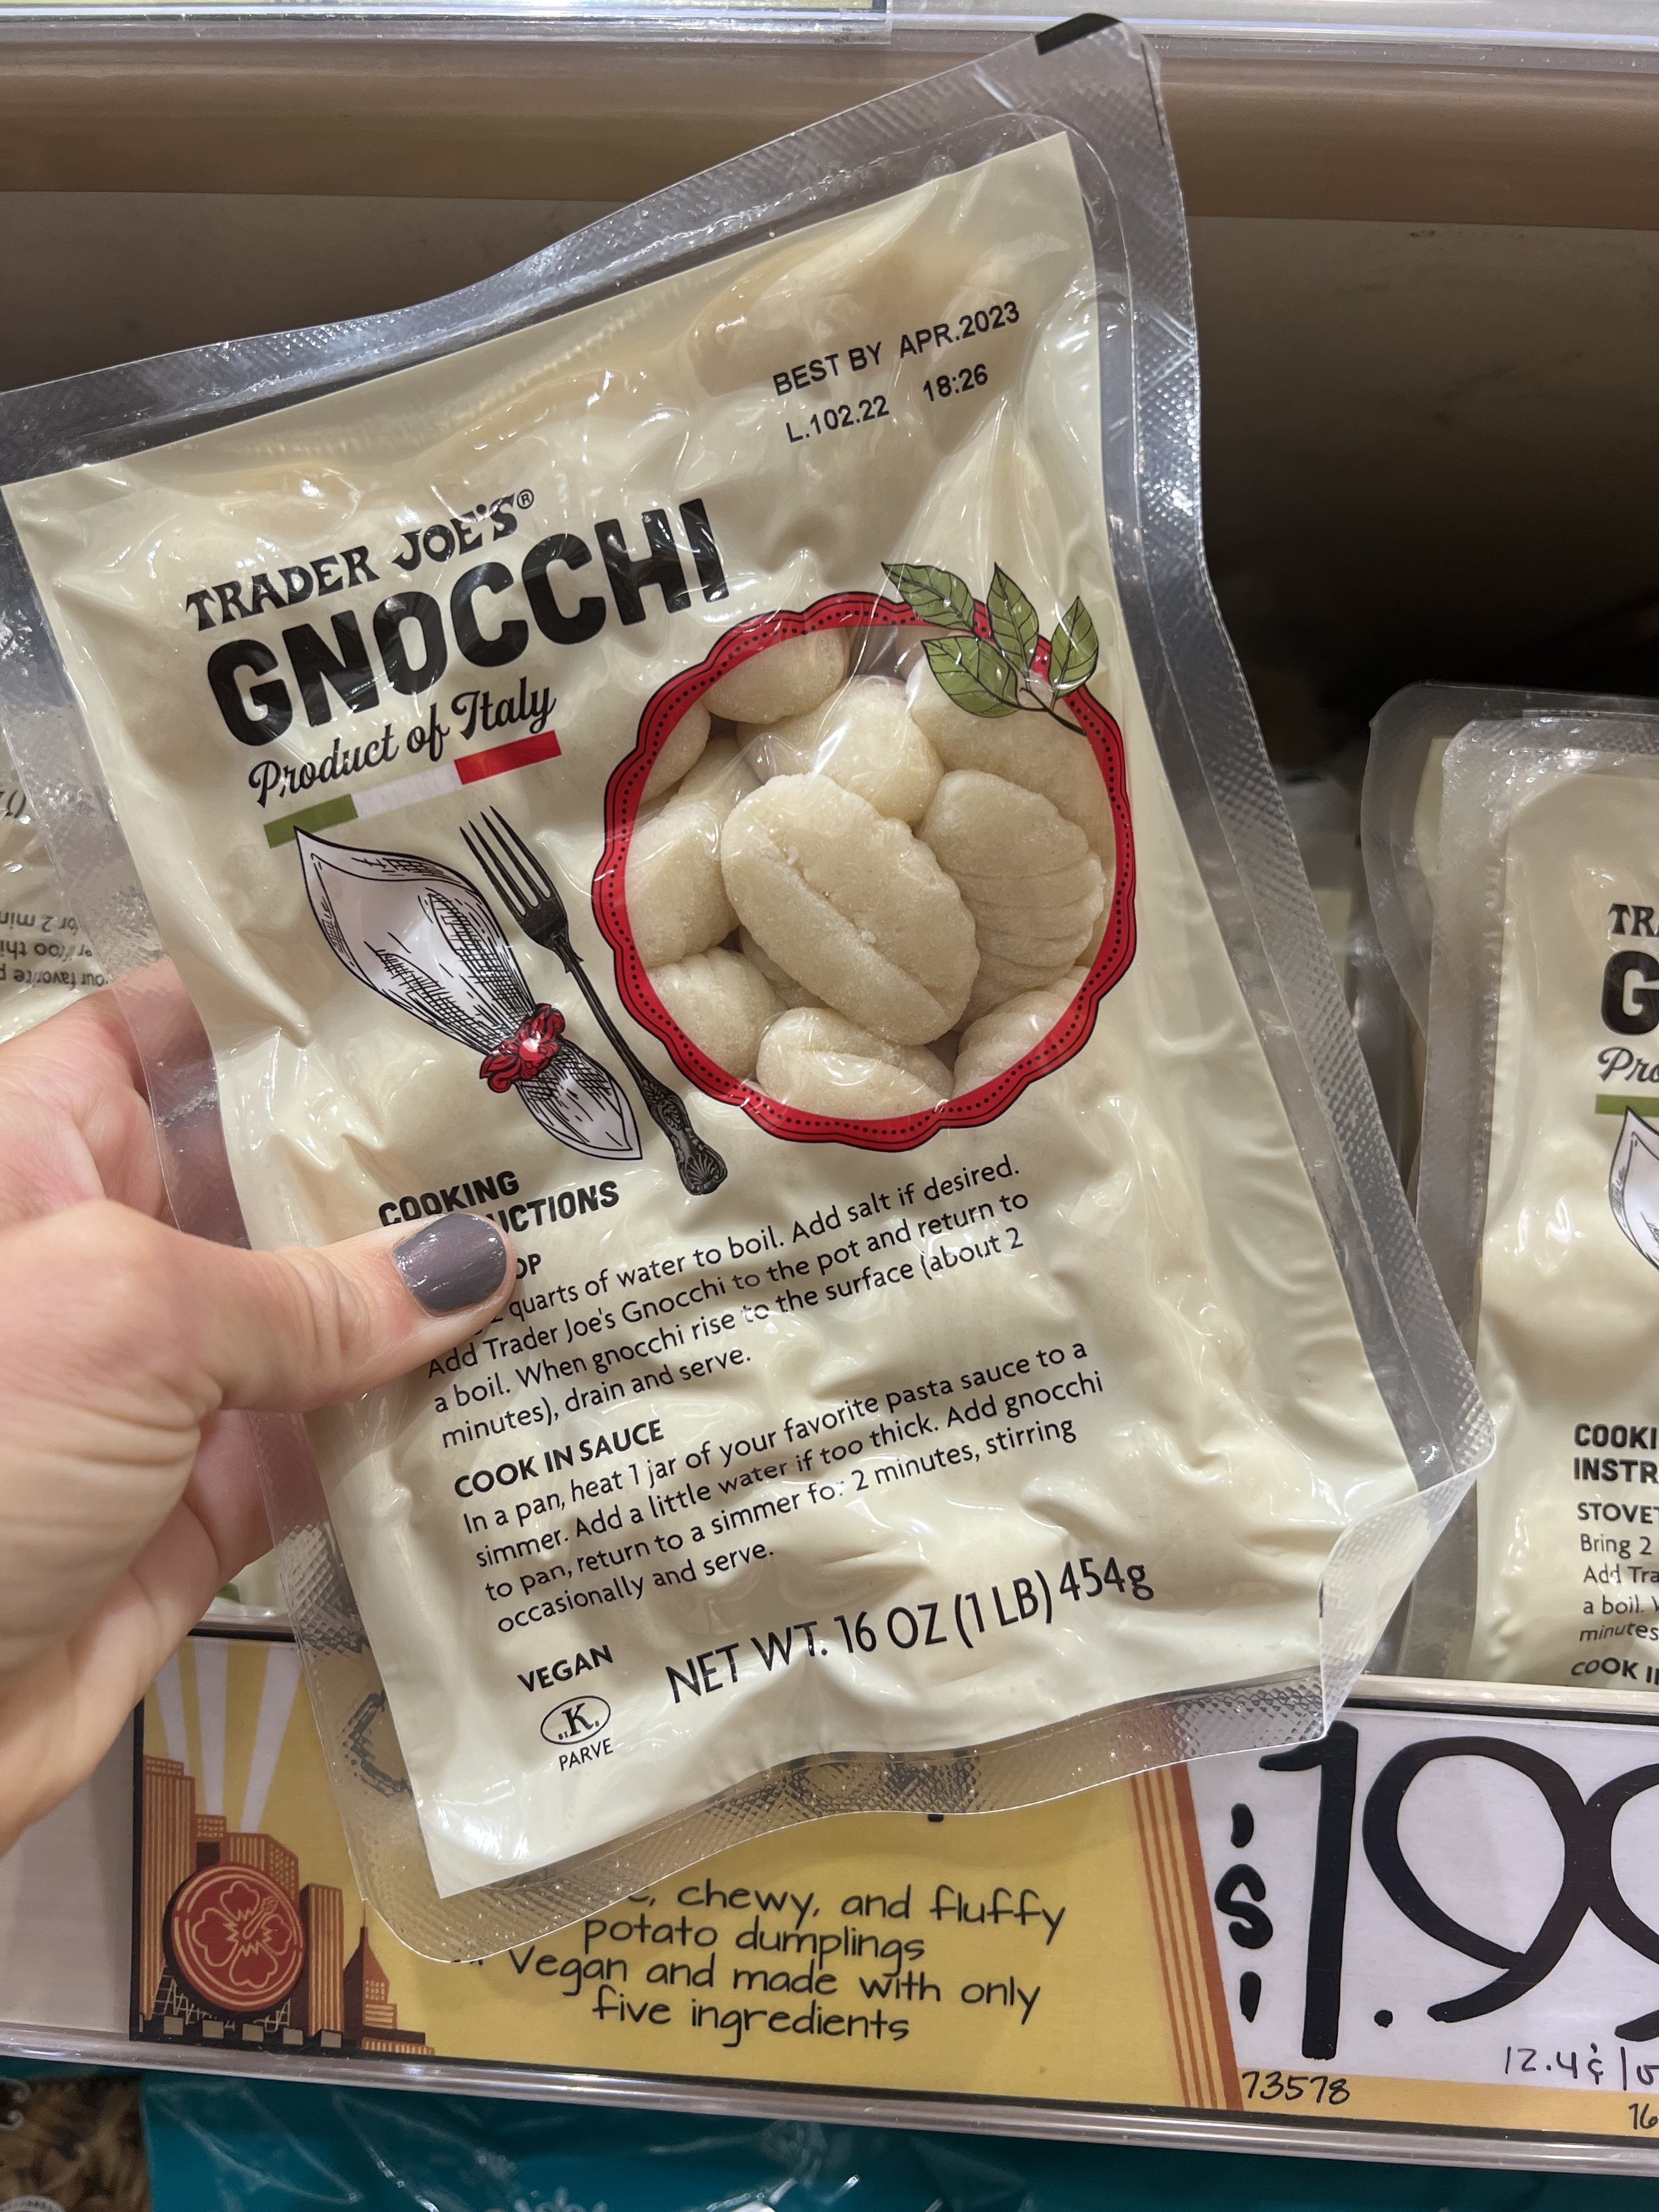 A package of gnocchi